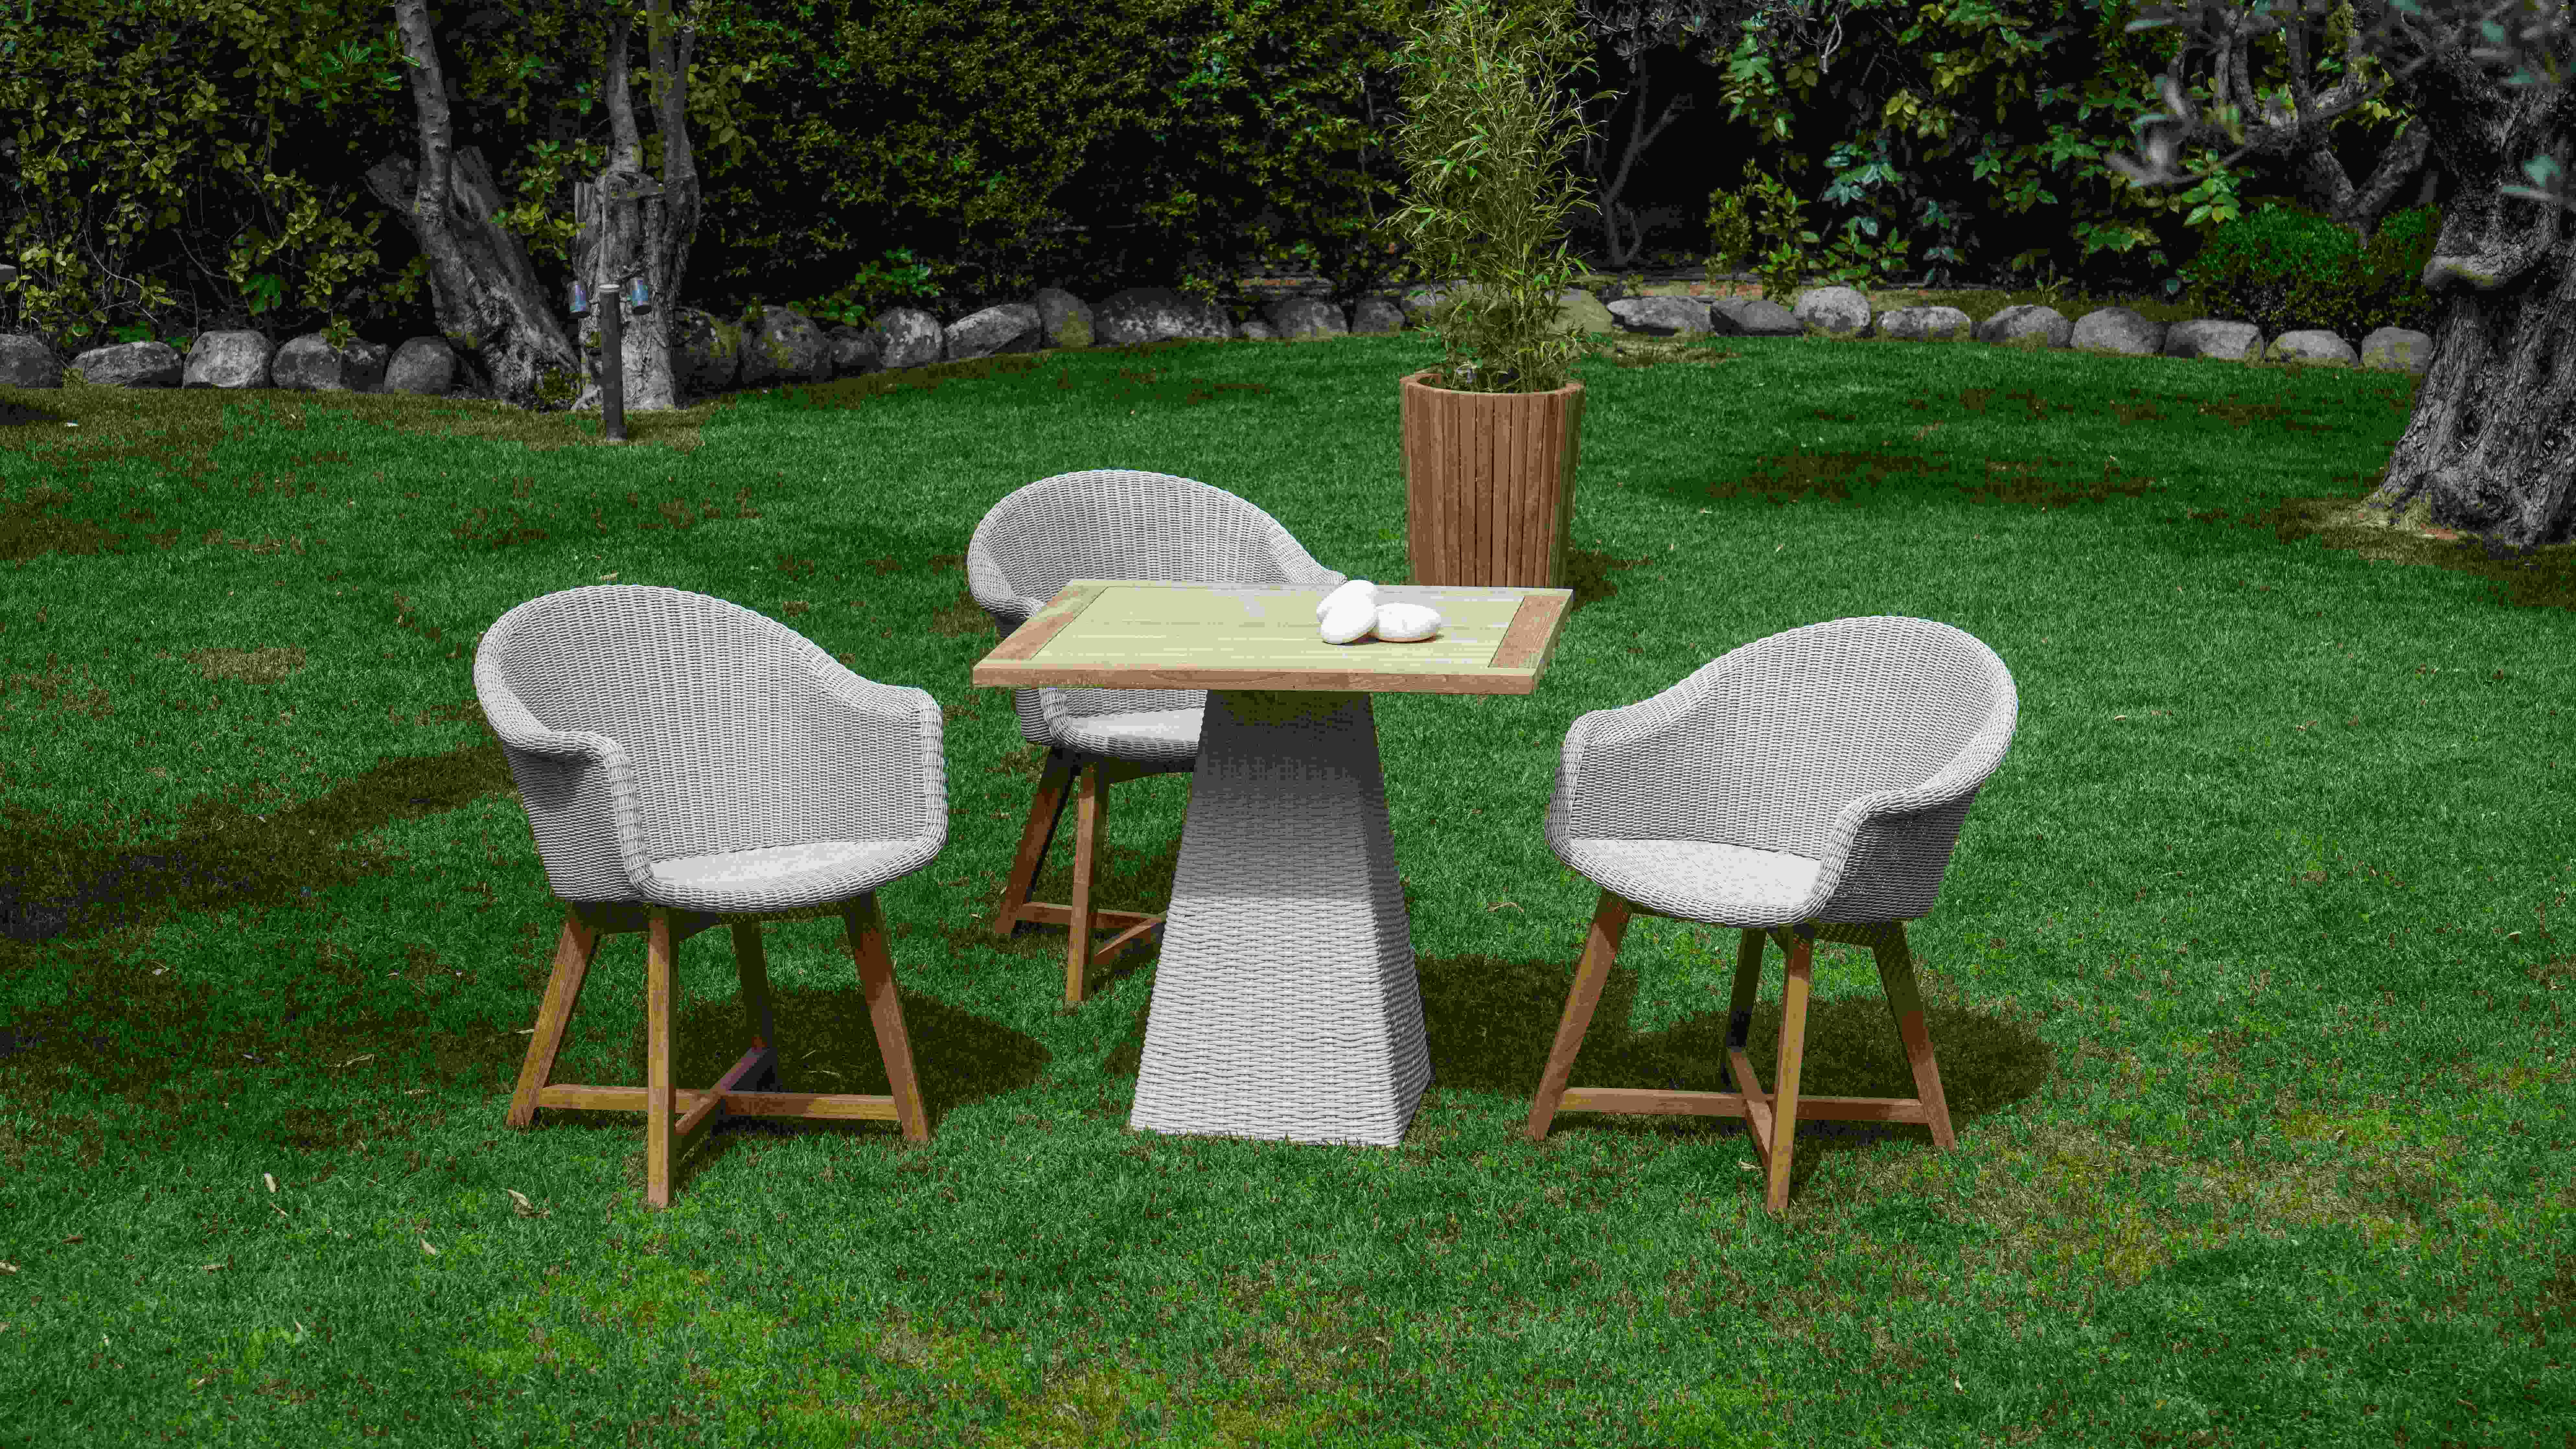 Gorgeous Backyard Collections Patio Furniture Heights Dining with regard to dimensions 7952 X 4472